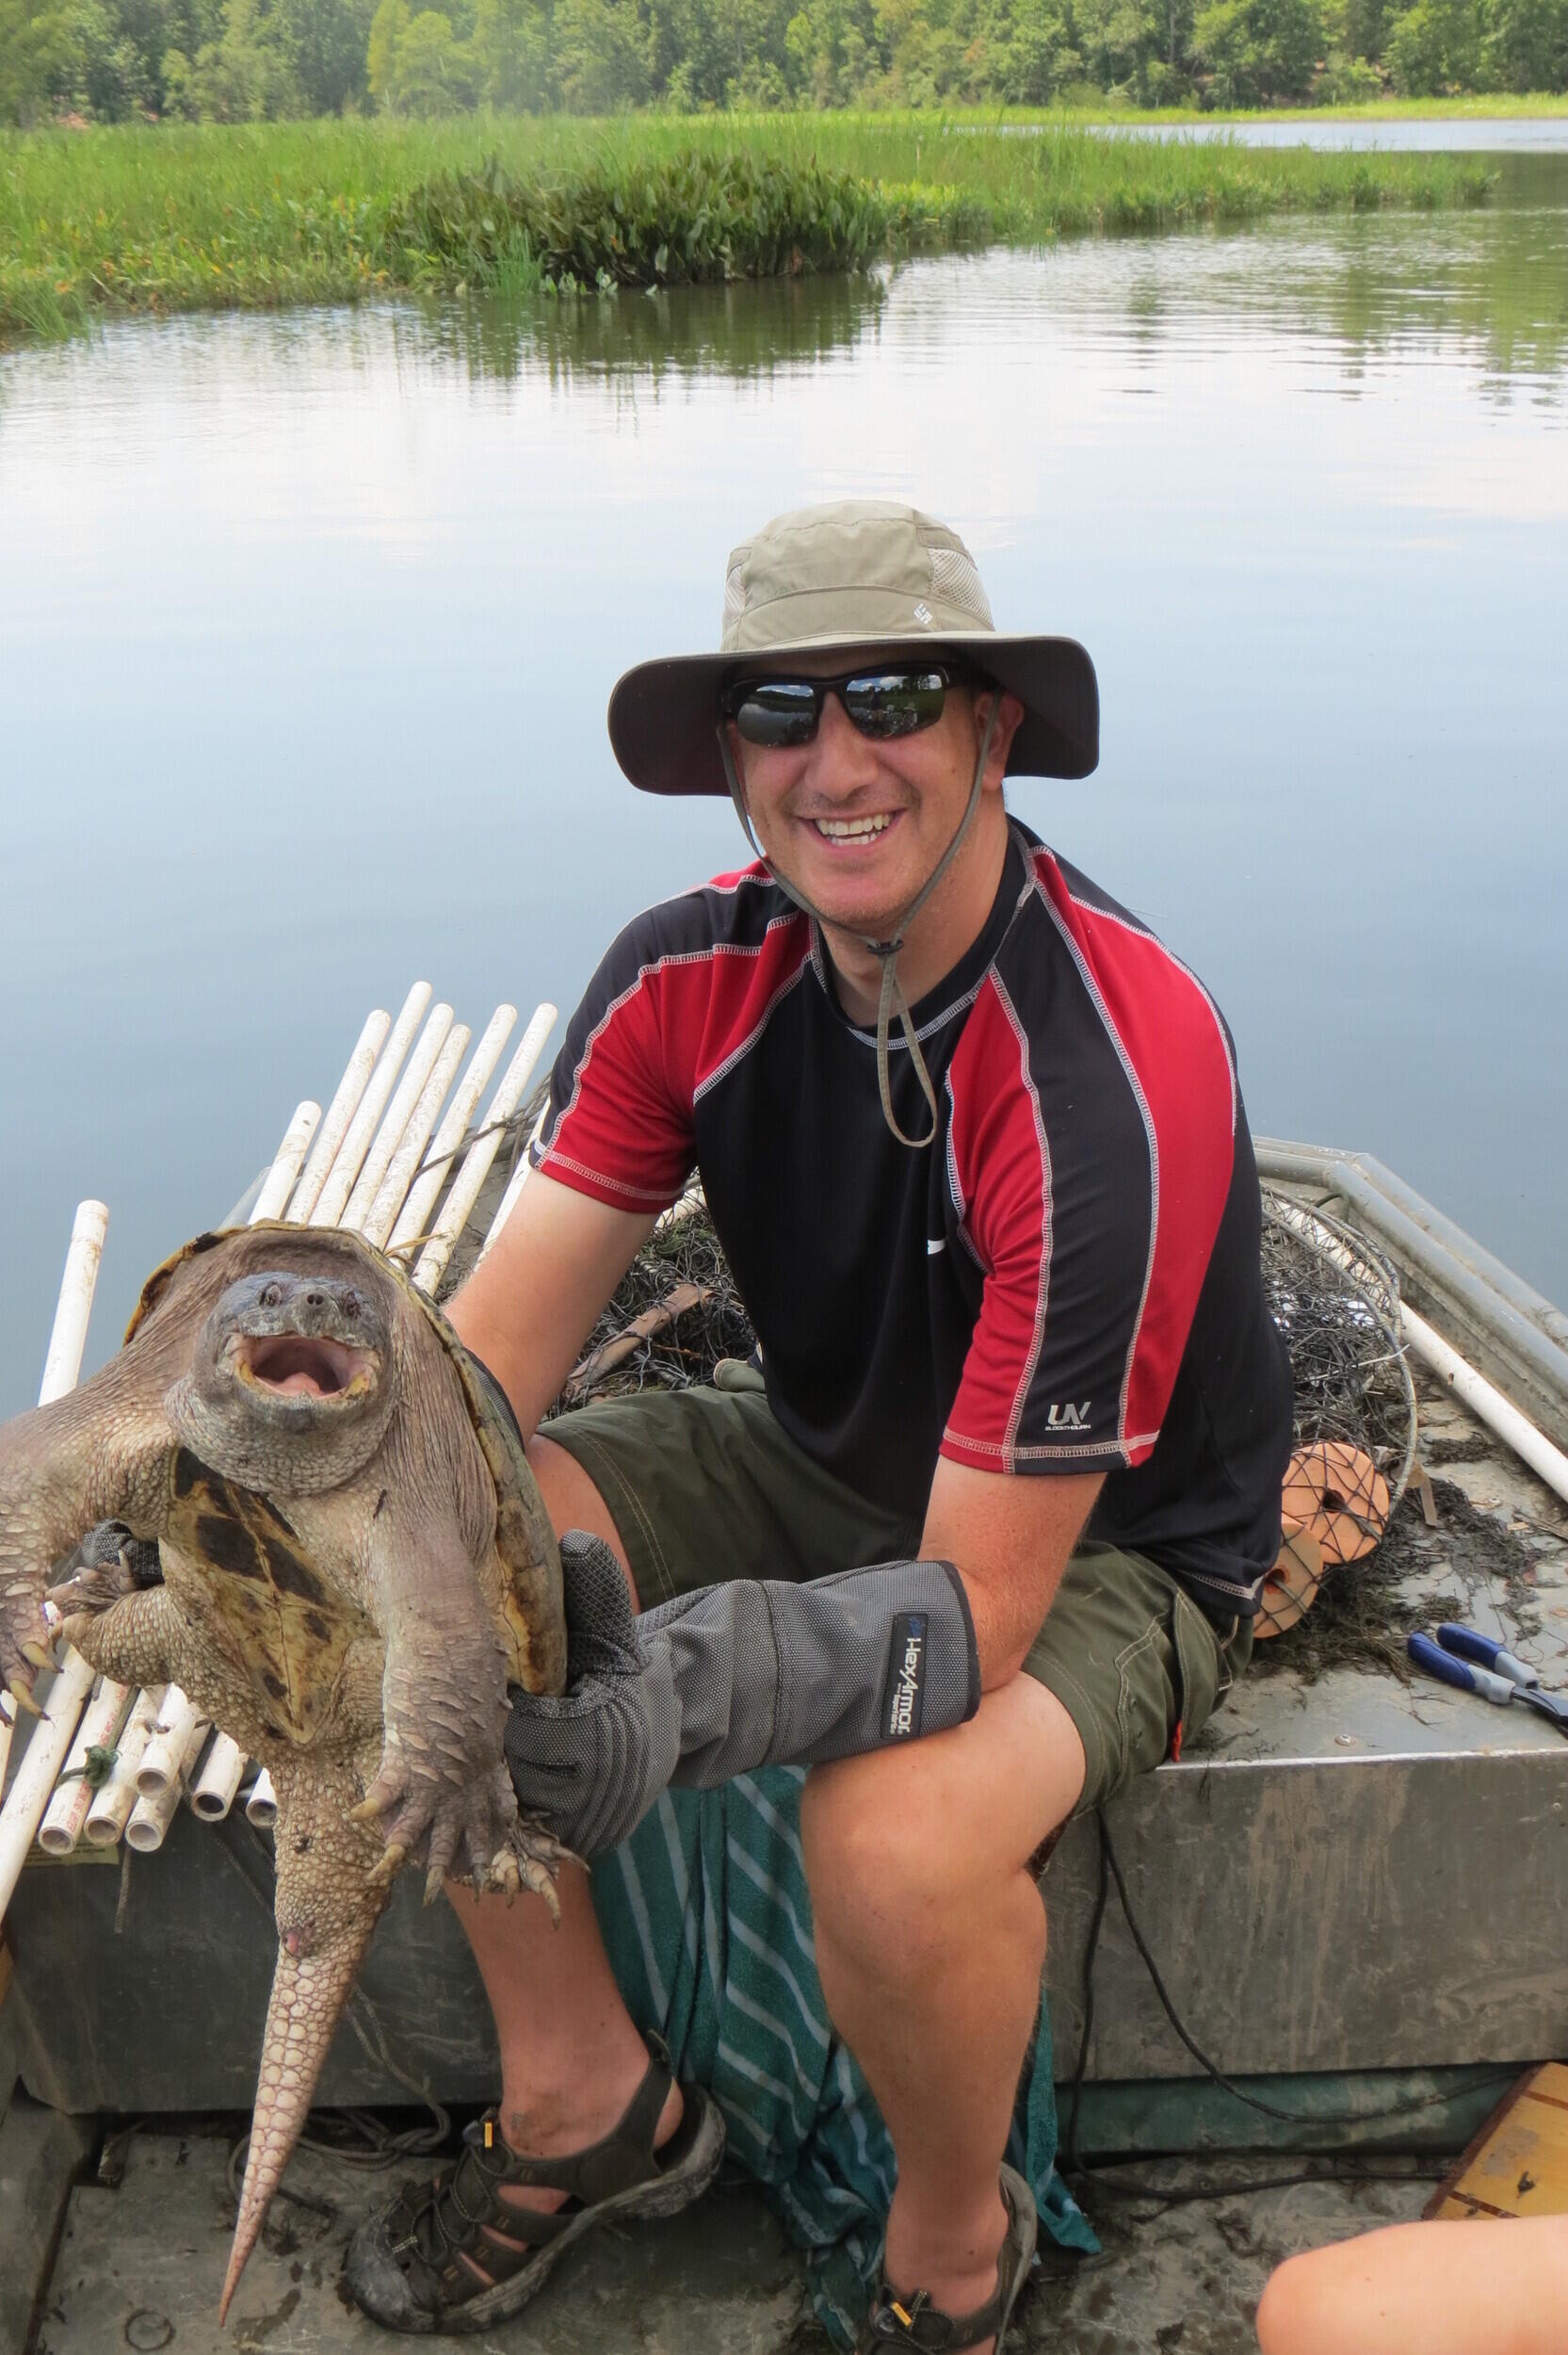 Armed with gauntlets, or protective gloves, Colteaux holds a snapping turtle. (Photo credit: Courtesy of Team Snapper)